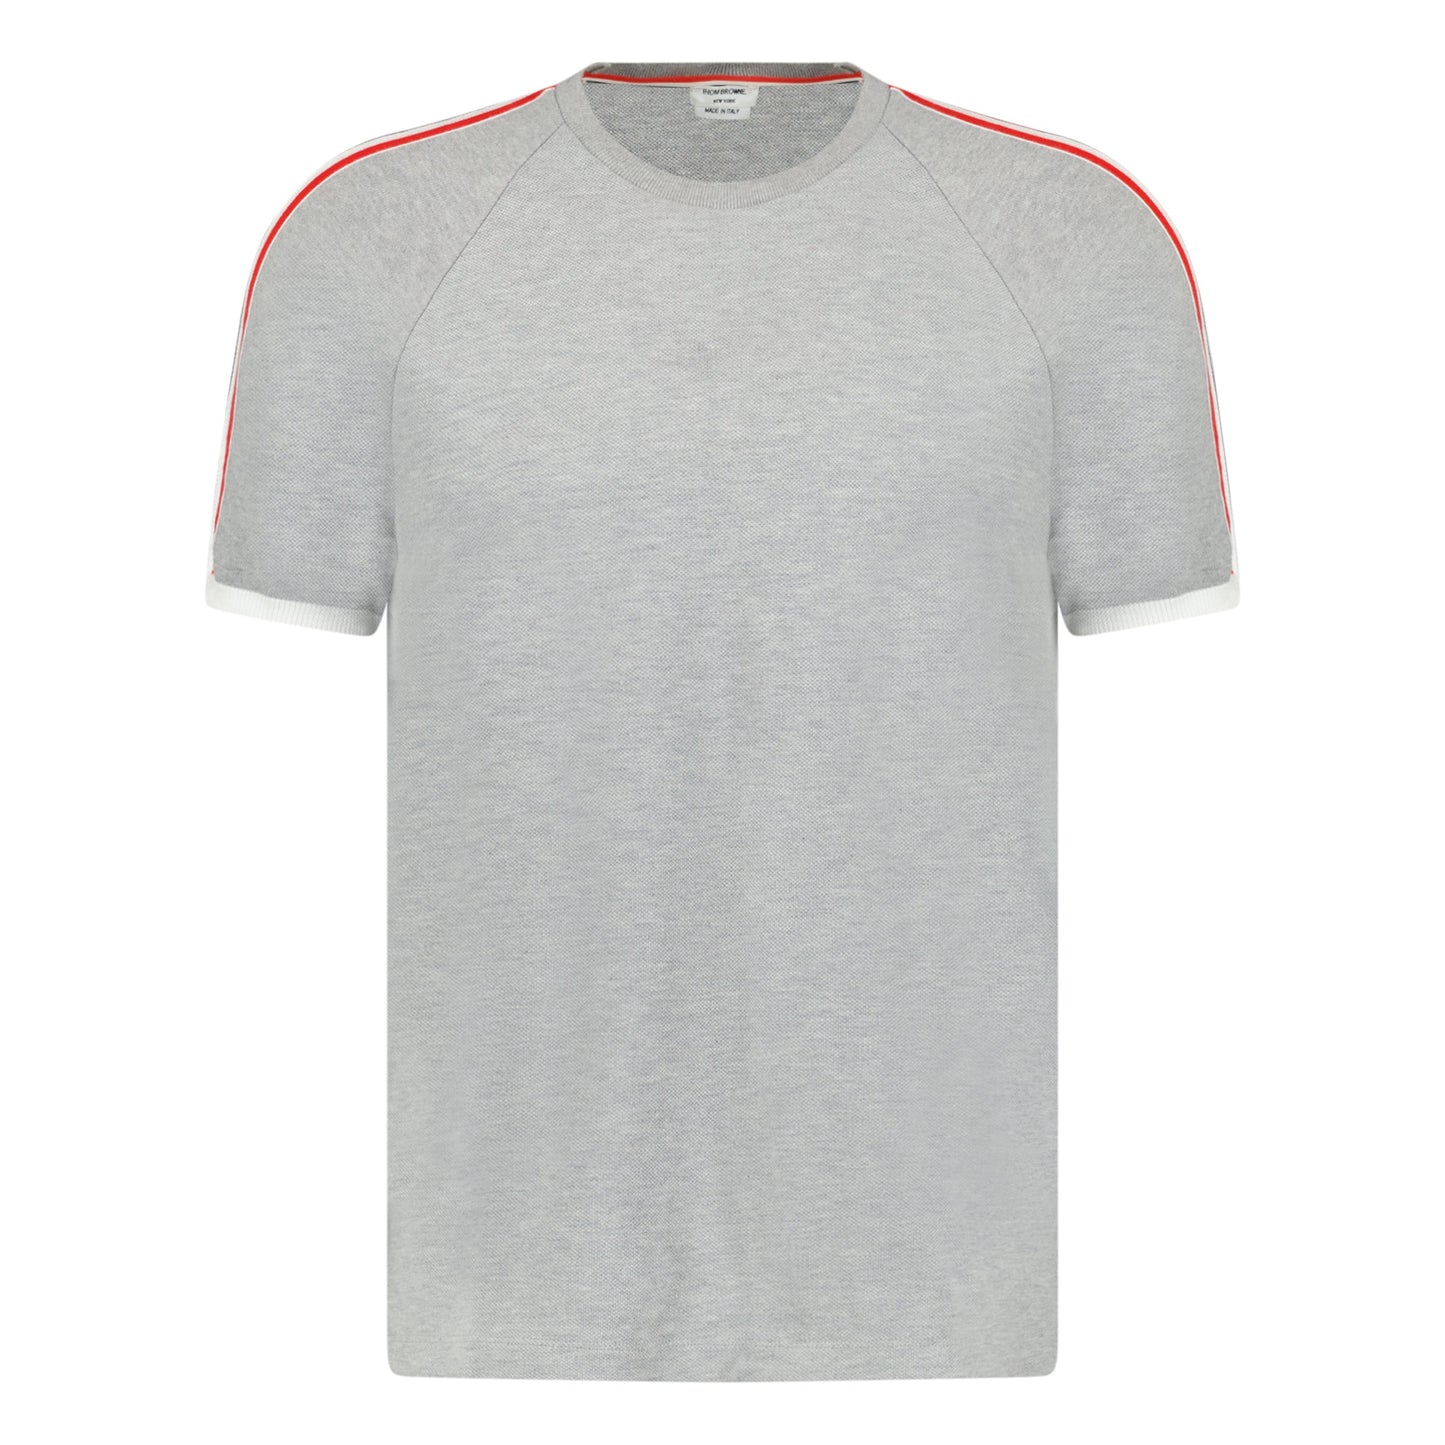 THOM BROWNE KNITTED T SHIRT GREY - SMALL - affluentarchivesUsed HIGH END DESIGNER CLOTHING